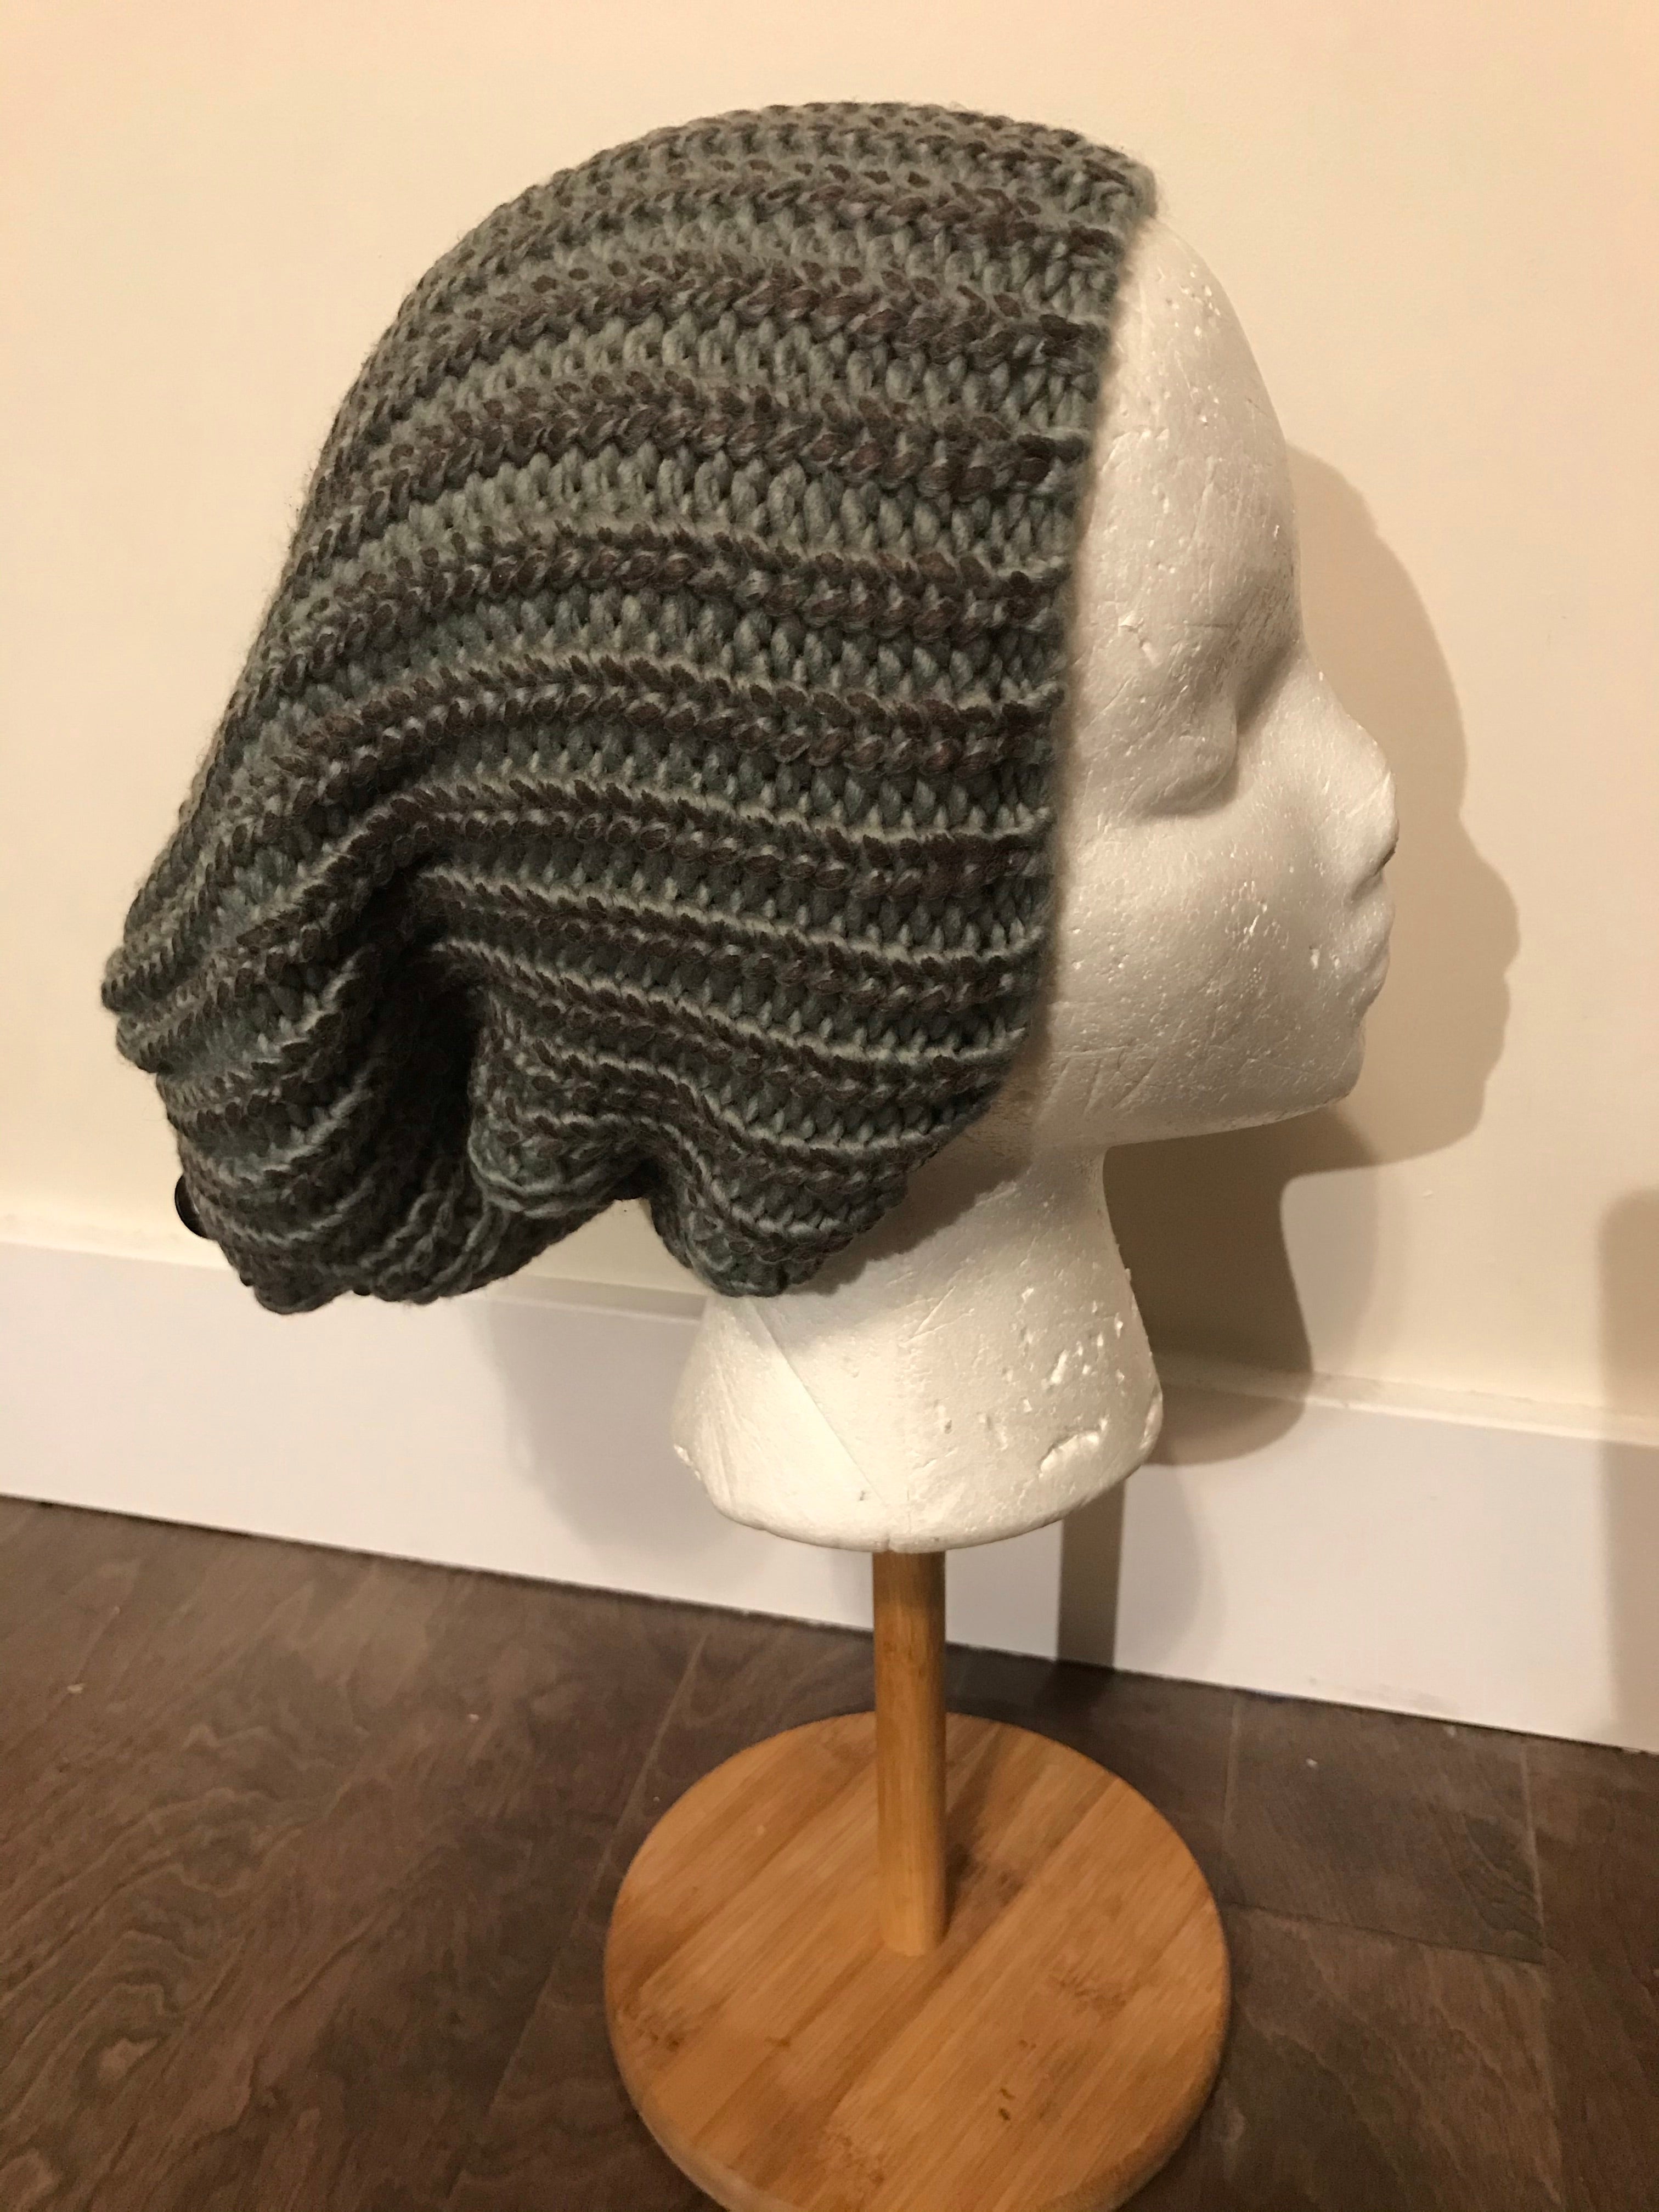 The Leathery Winter Beanie